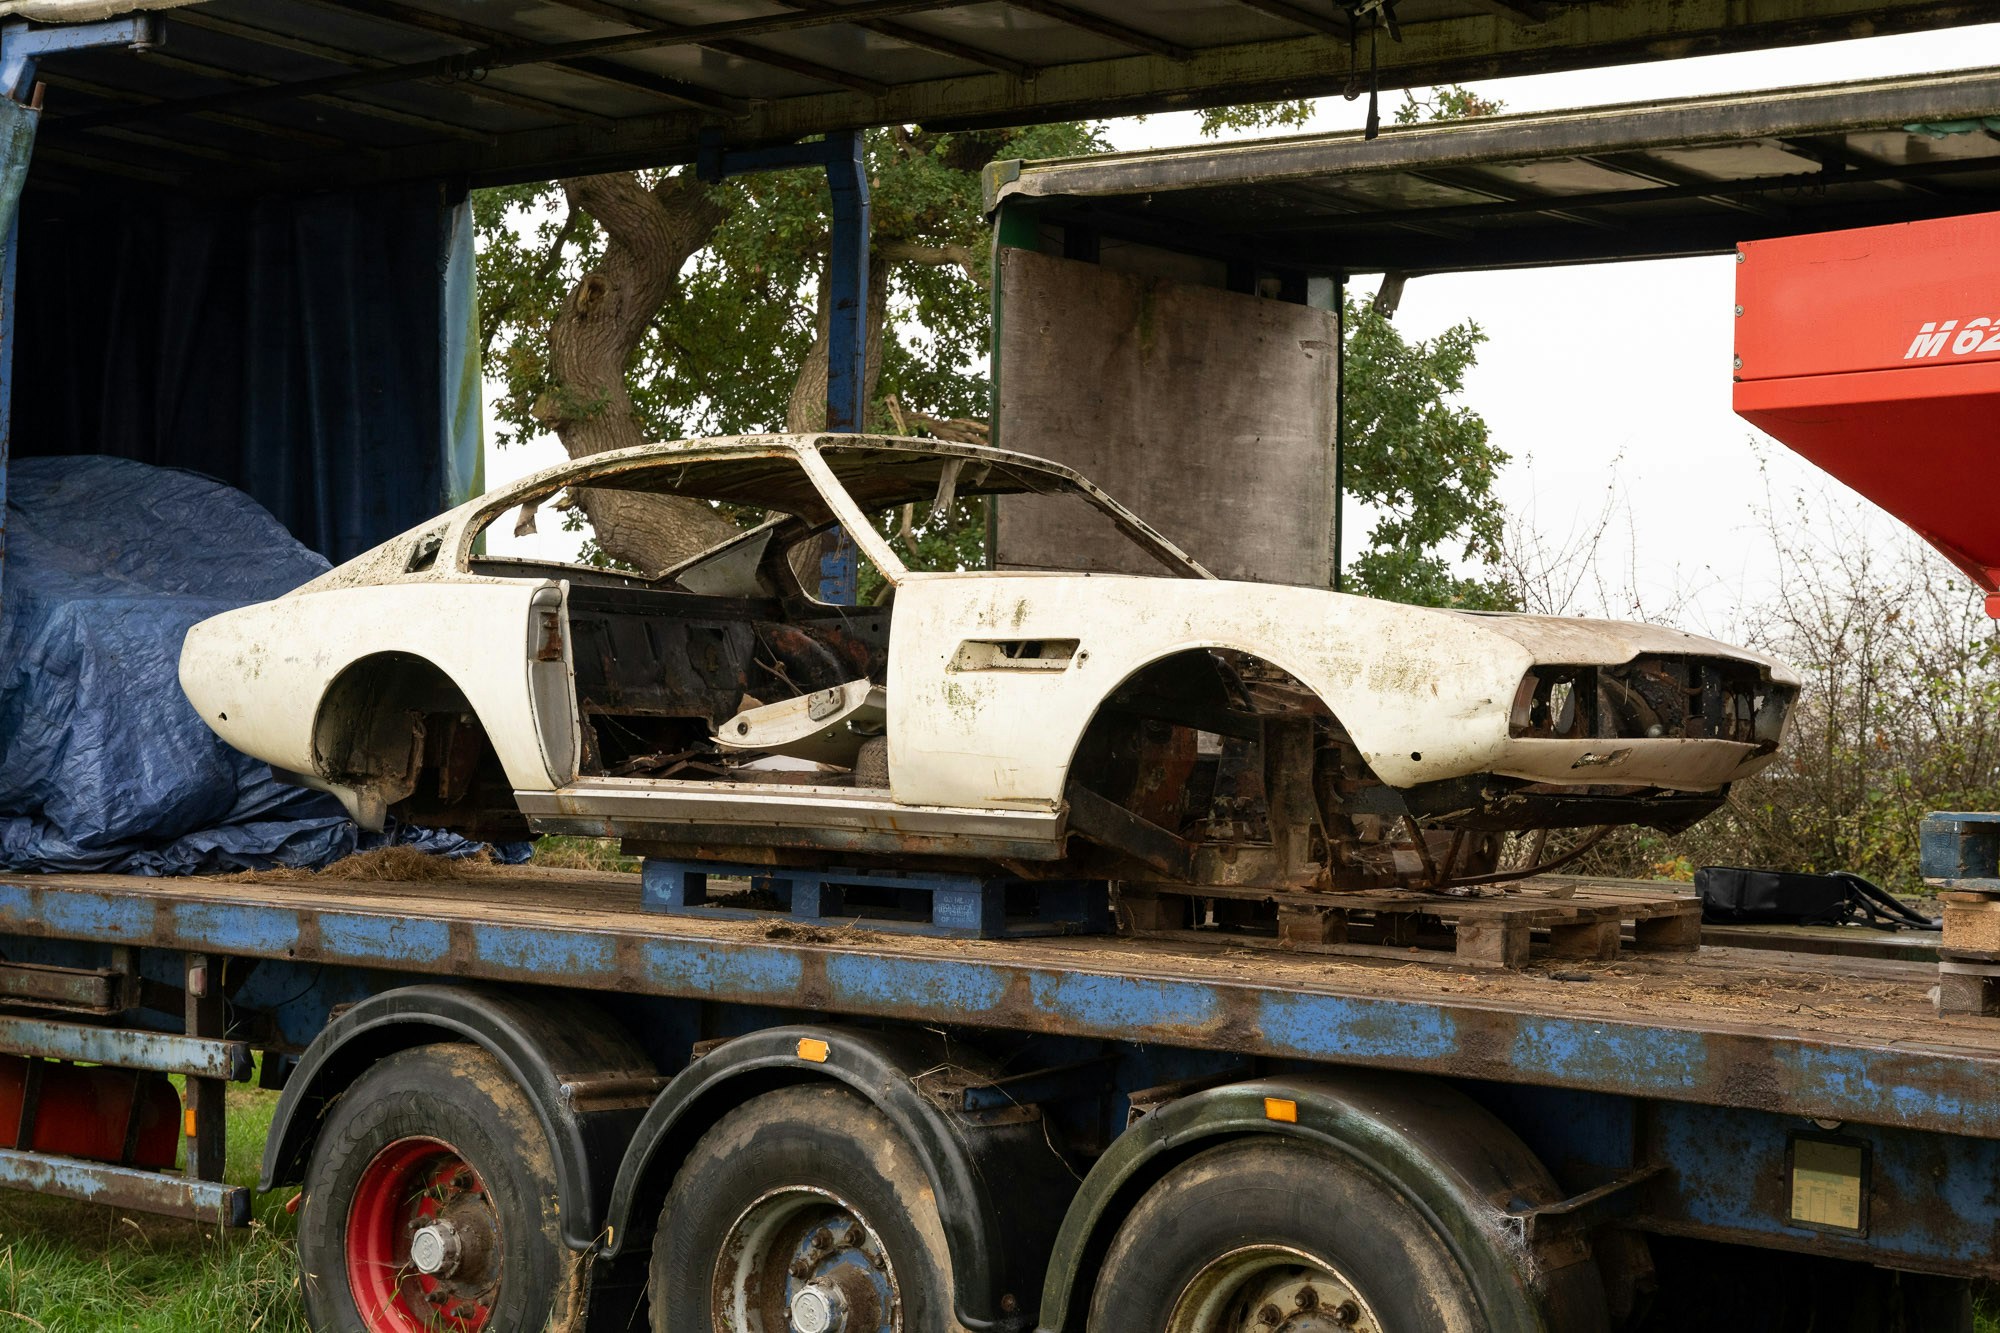 1969 Aston Martin Dbs Series 1 Shell For Sale By Auction In Knutsford,  Cheshire, United Kingdom